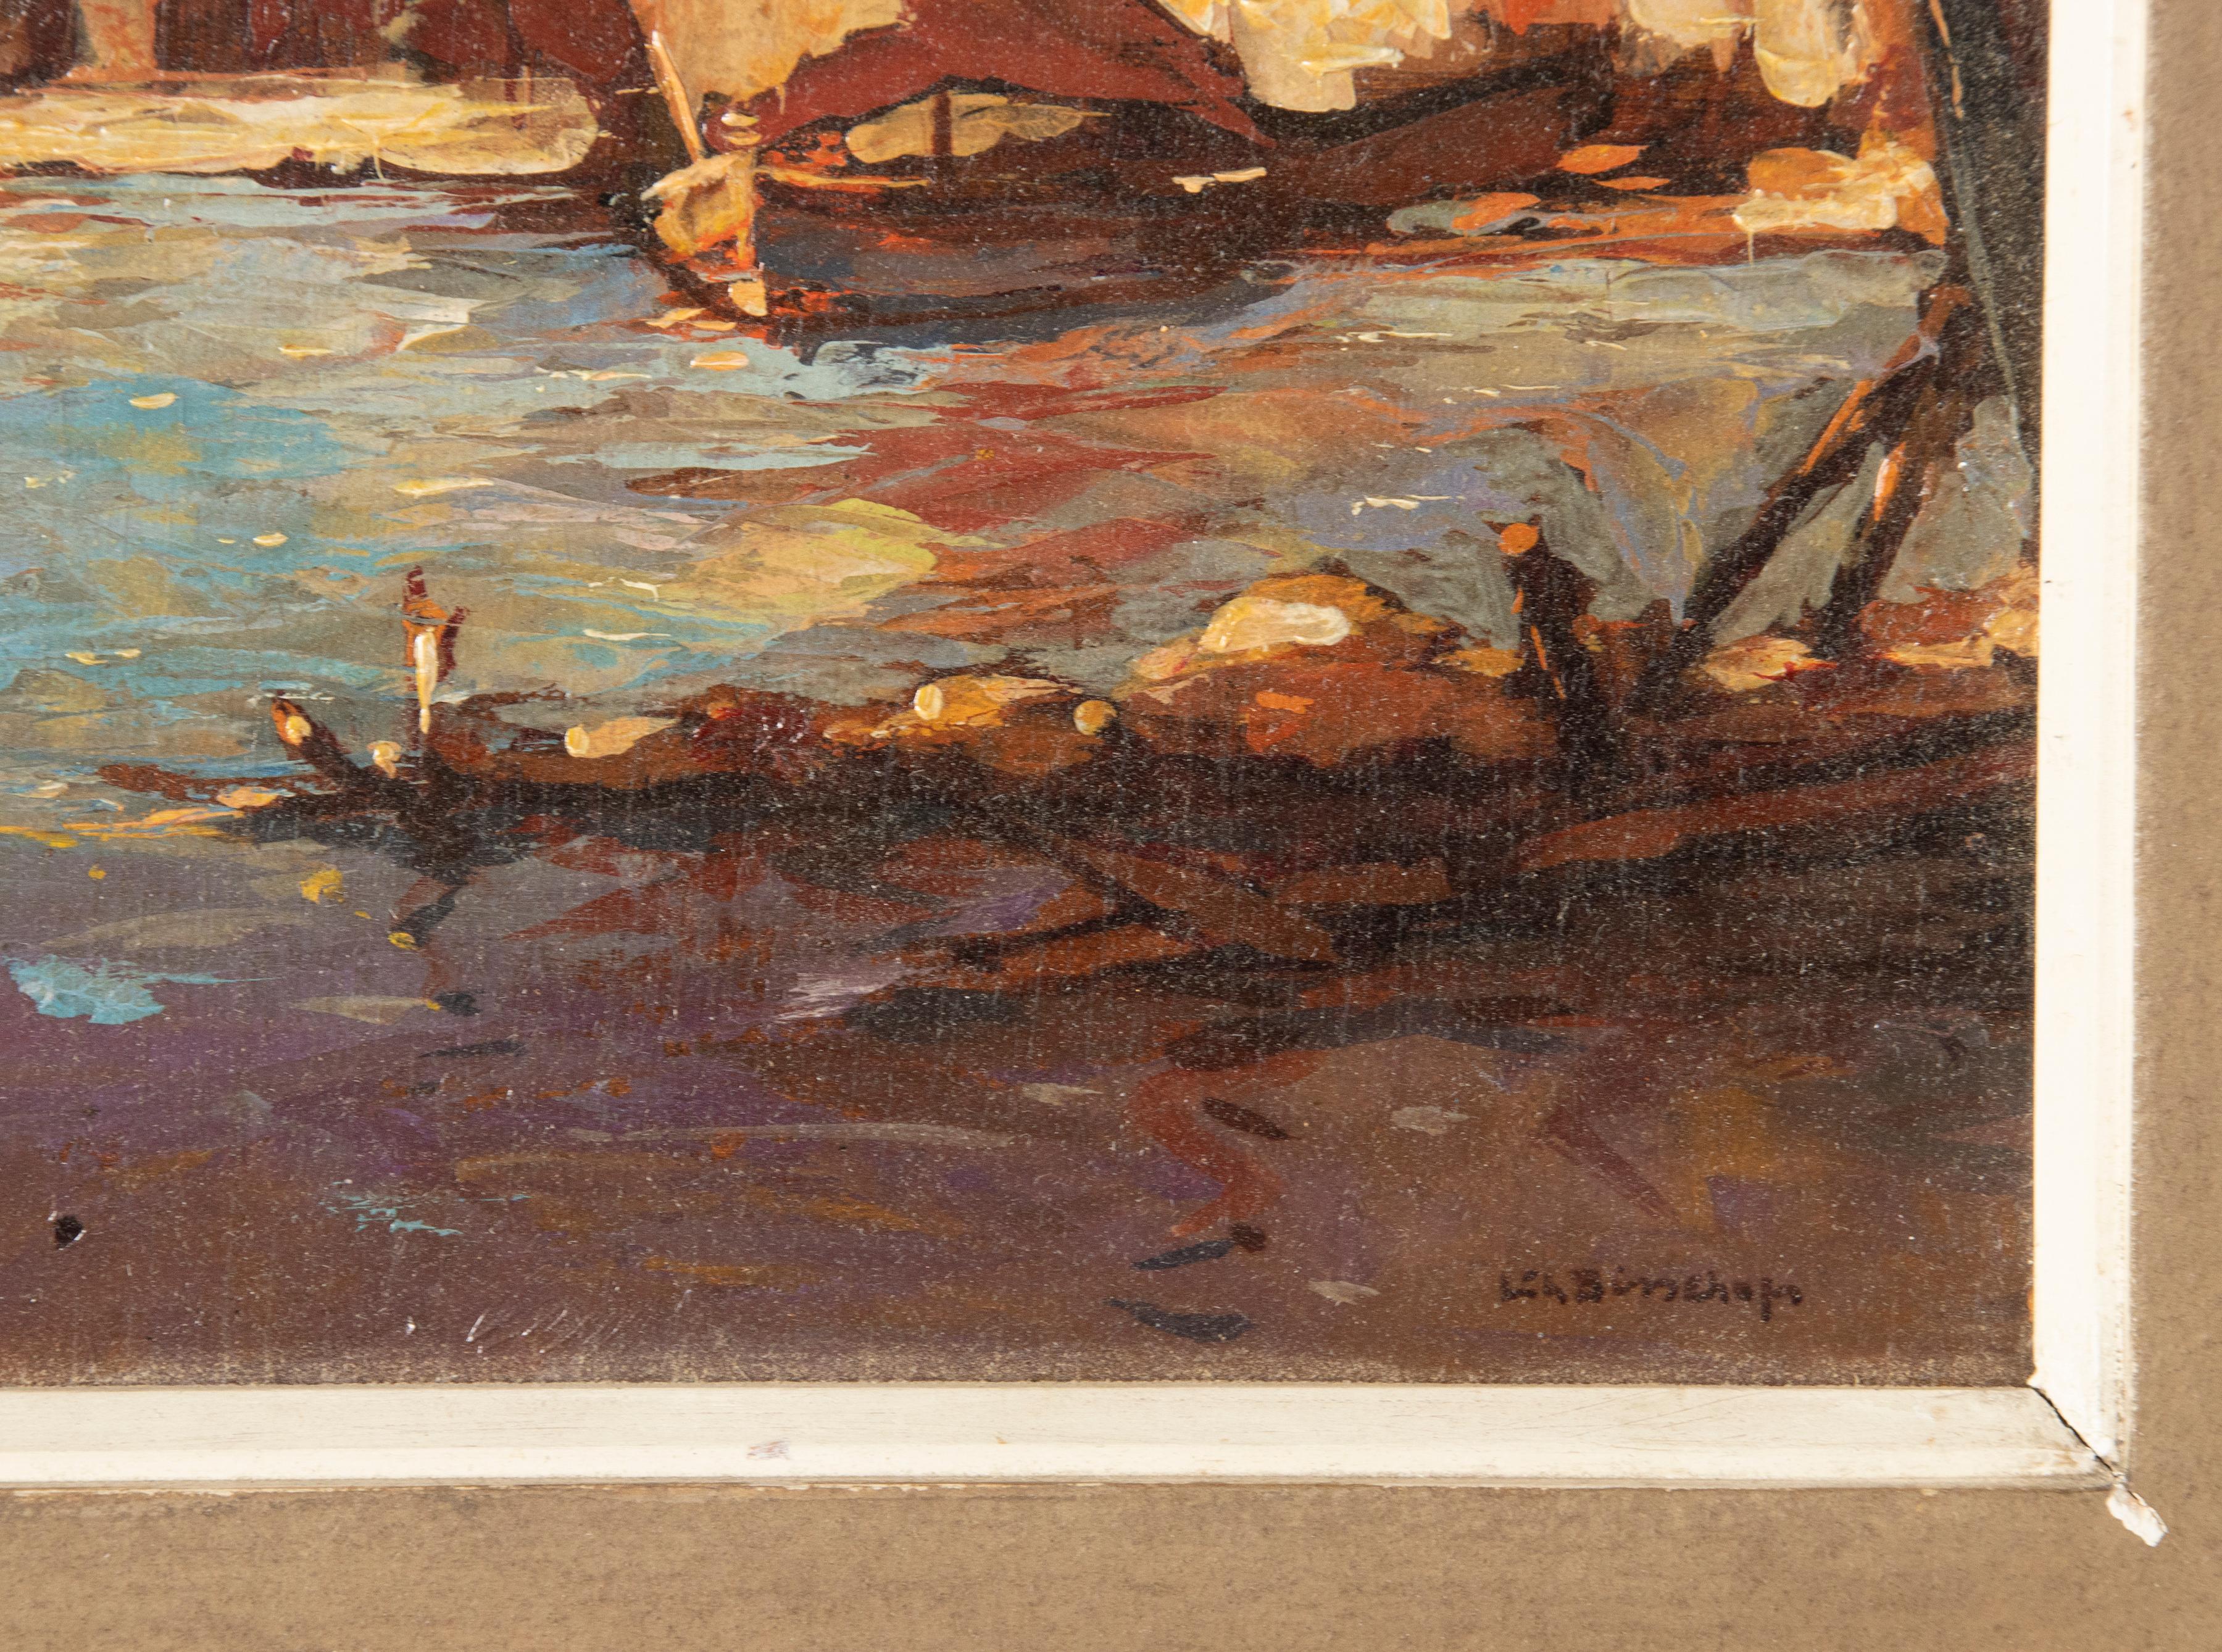 Mid-20th Century Oil Painting from 1937 Harbor View by Carles Bisschops, Oil on Panel For Sale